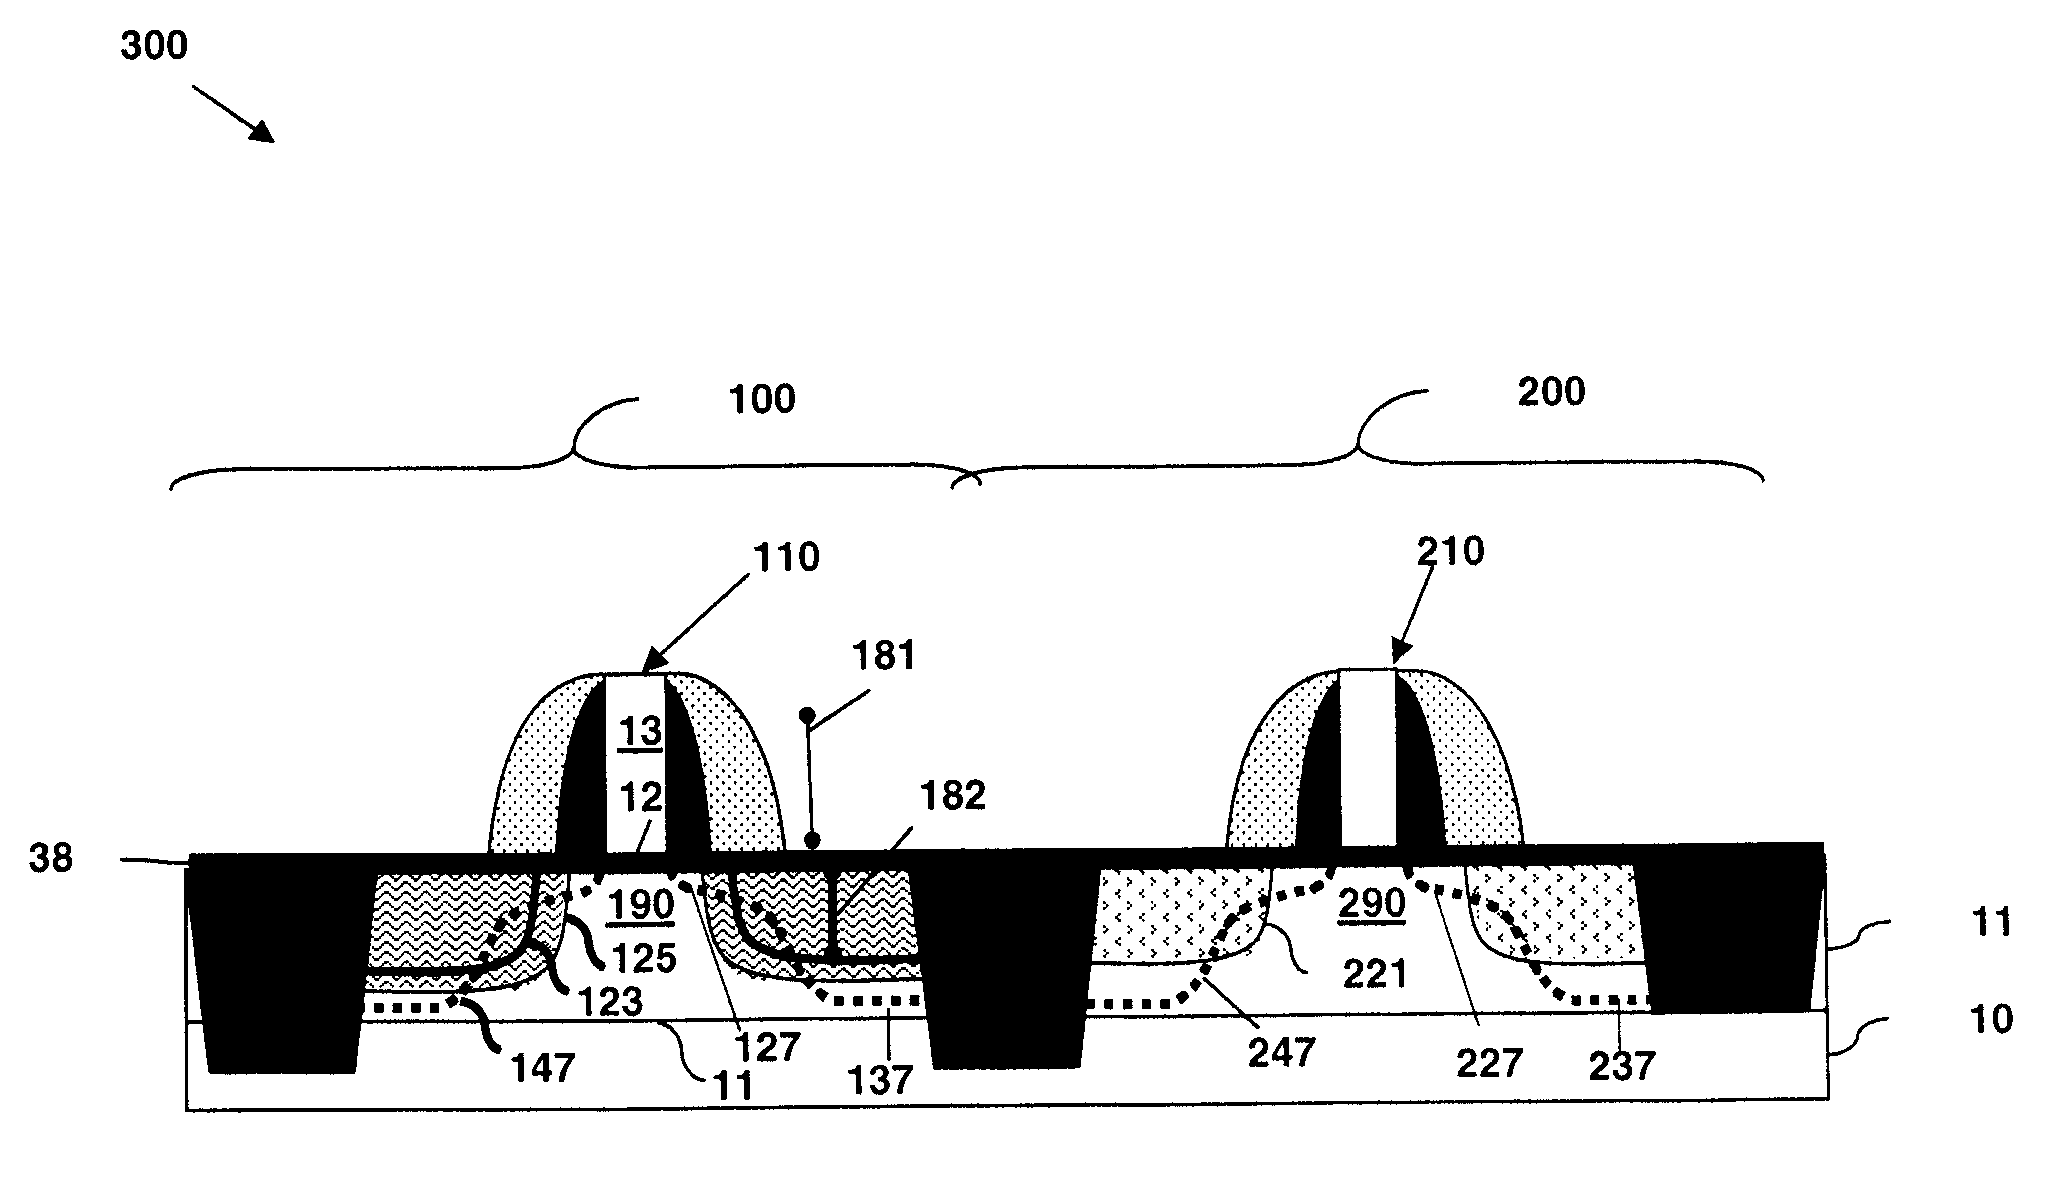 Semiconductor structure and method of forming the structure